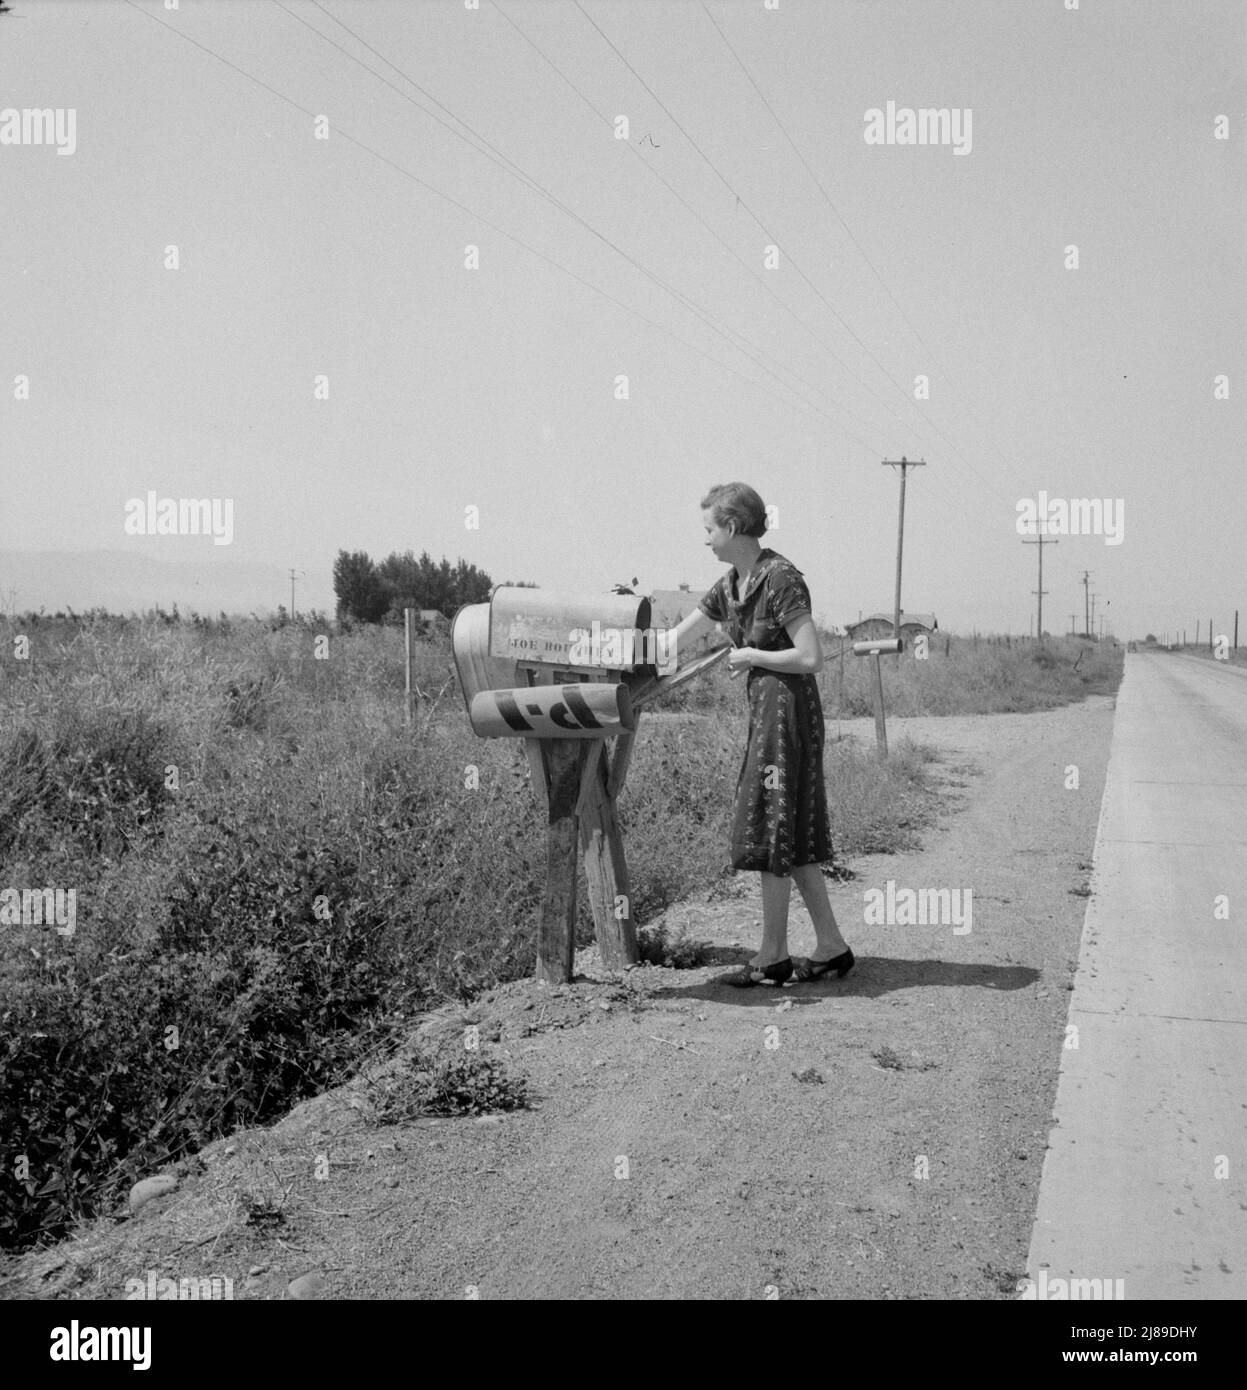 Mrs. Bouchey gets the morning mail. Wife of tenant purchase client. Washington, Yakima Valley, near Toppenish. Stock Photo